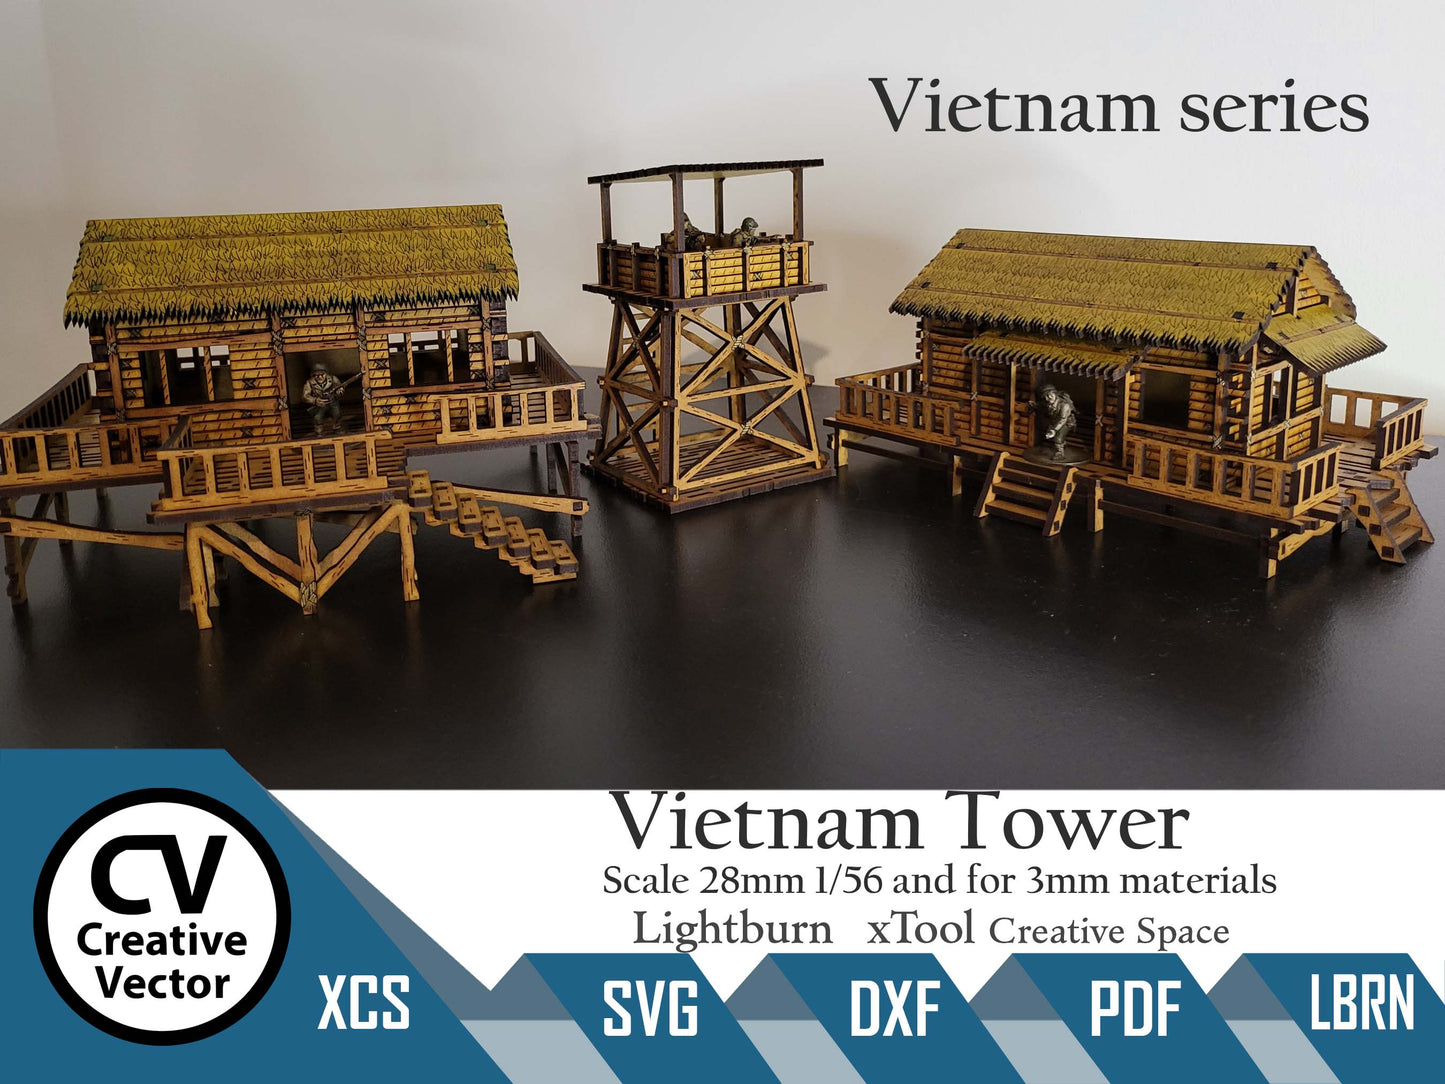 Vietnam Tower in scale 28 mm